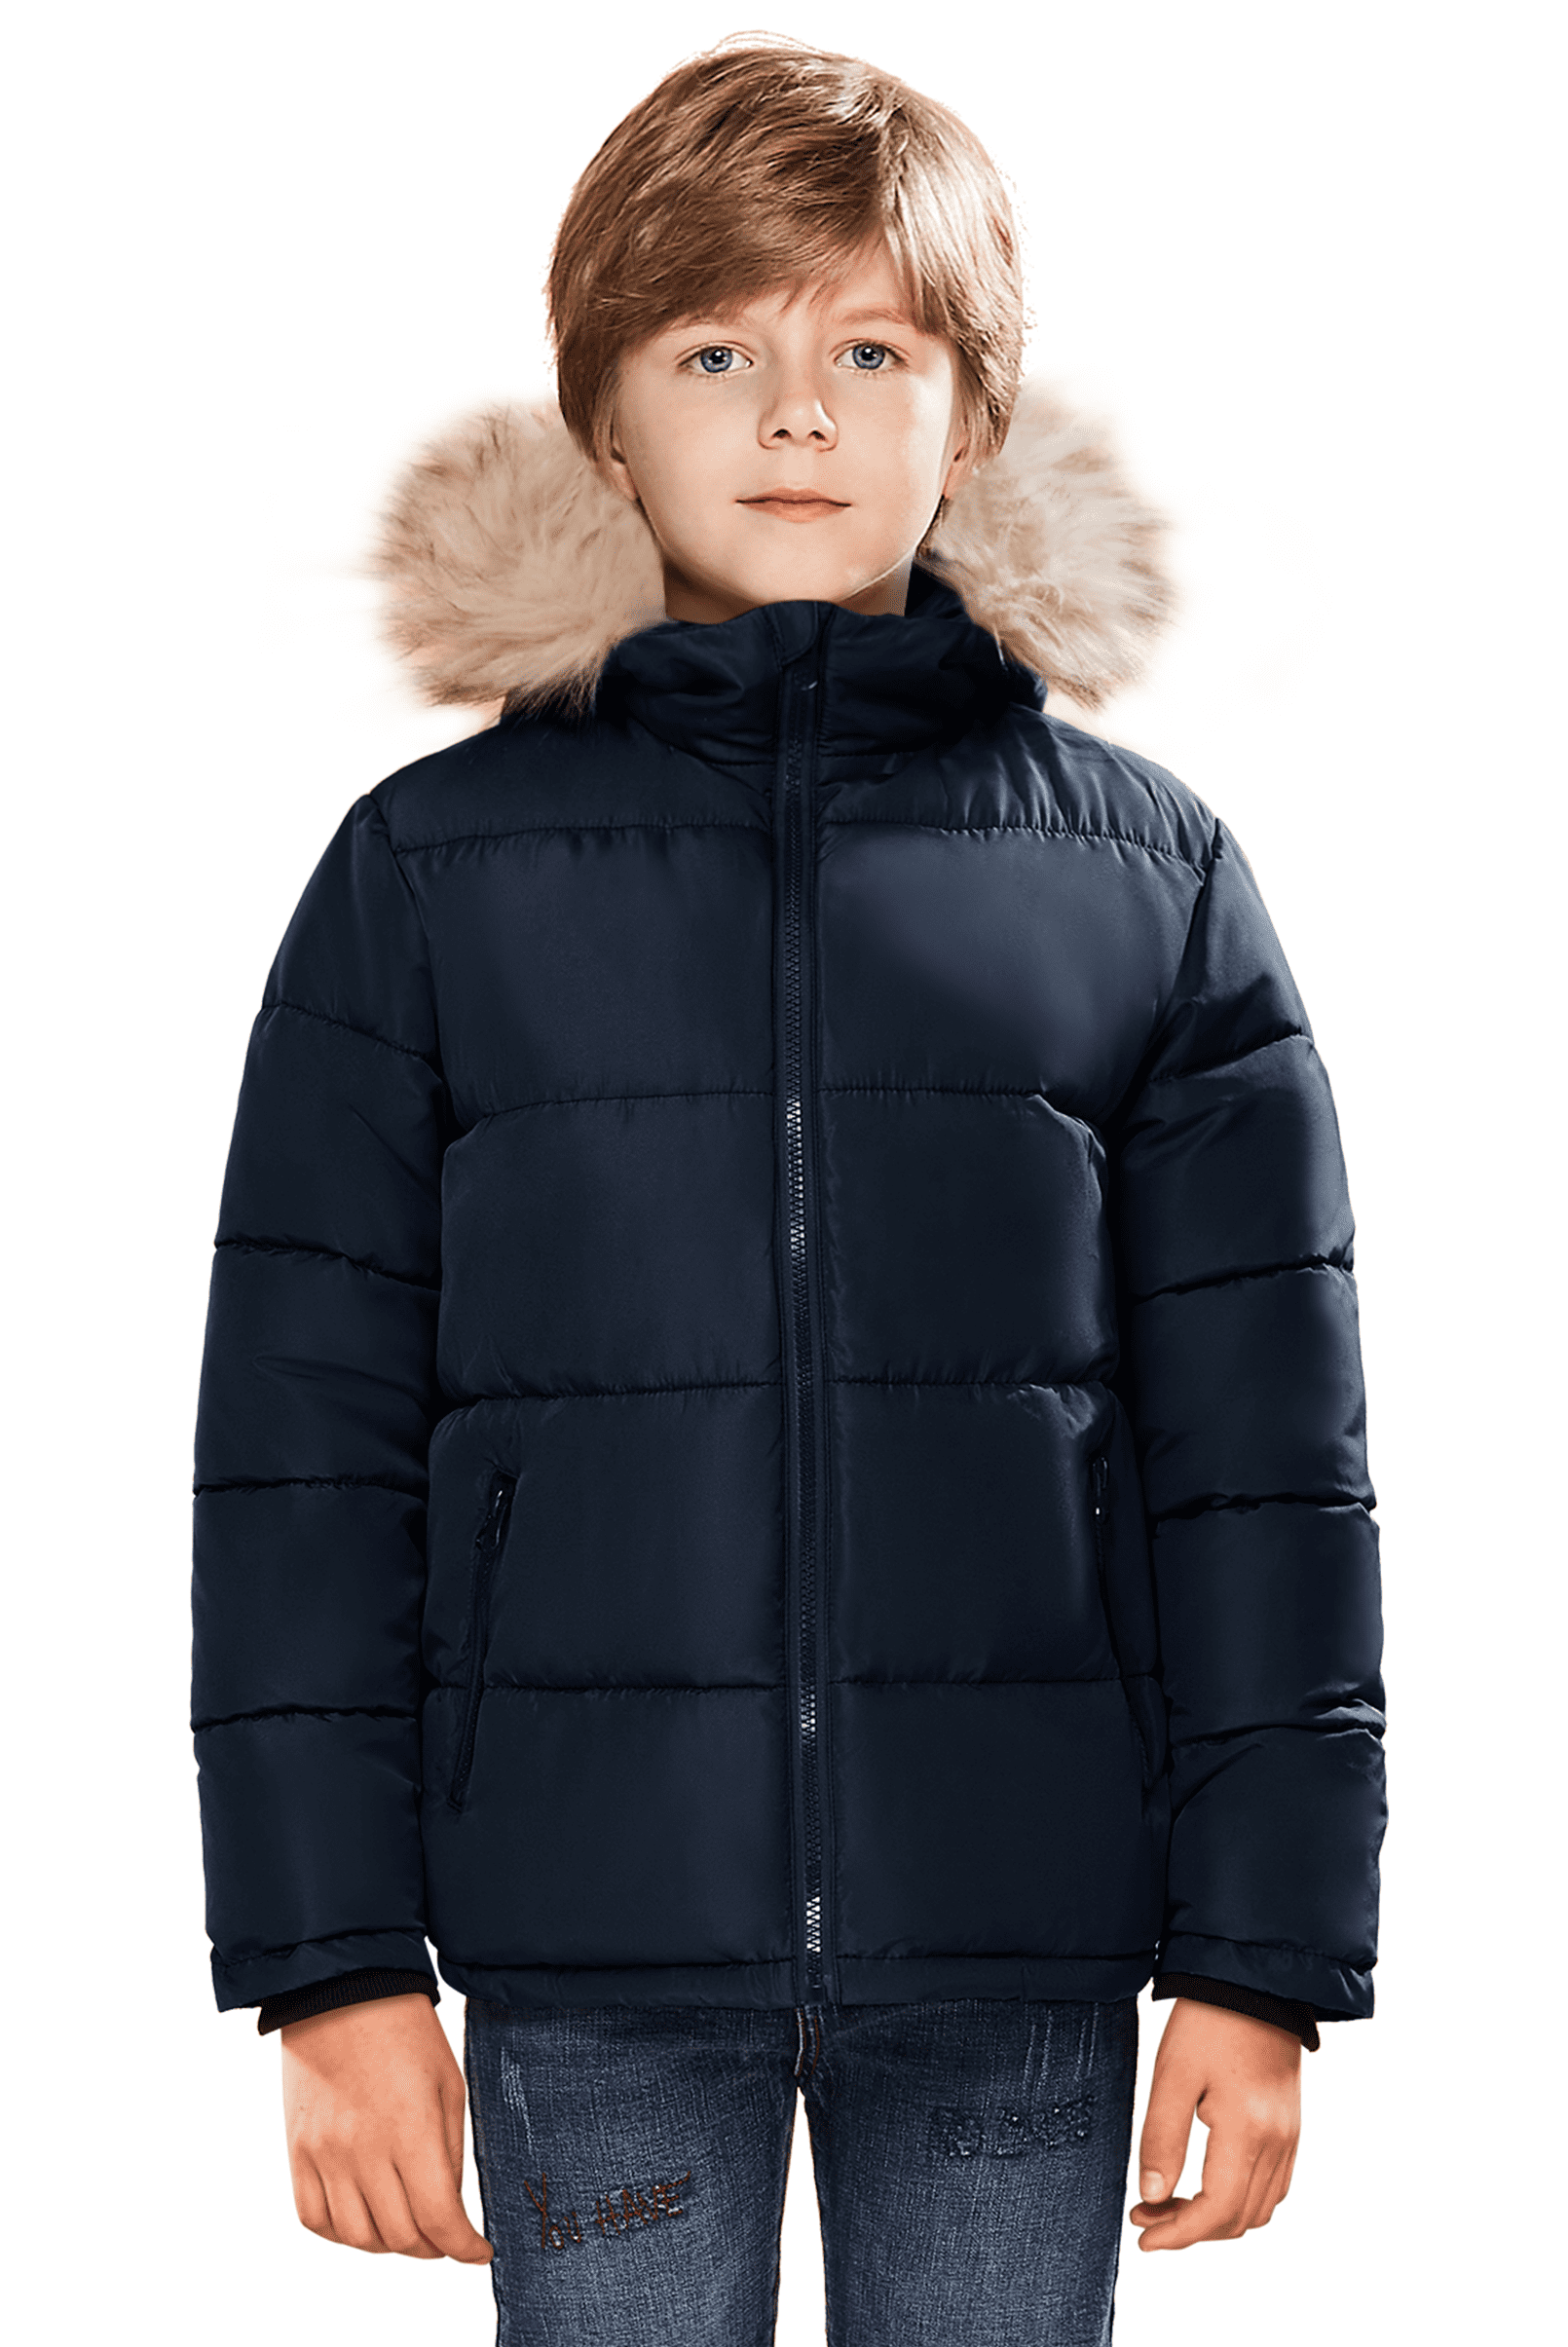 SOLOCOTE Boys Winter Coats Puffer Fake-Down Mid-Weight Hooded Padded ...